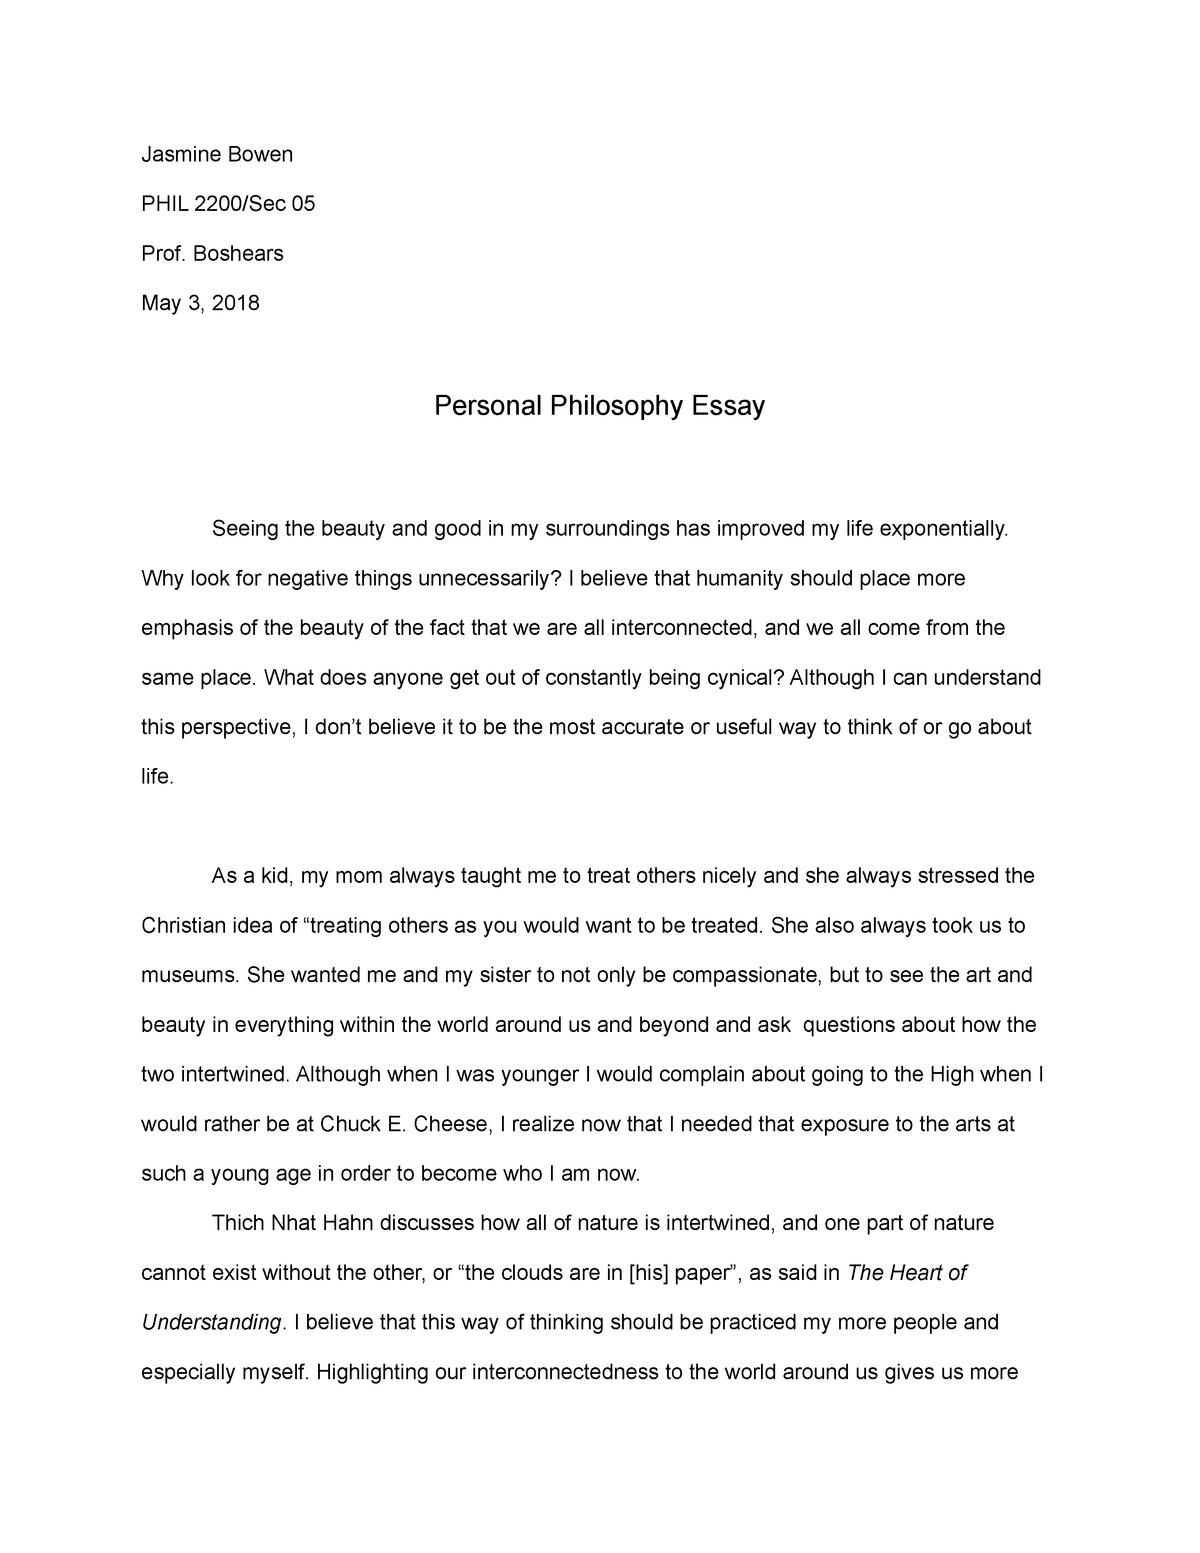 what is your personal philosophy essay